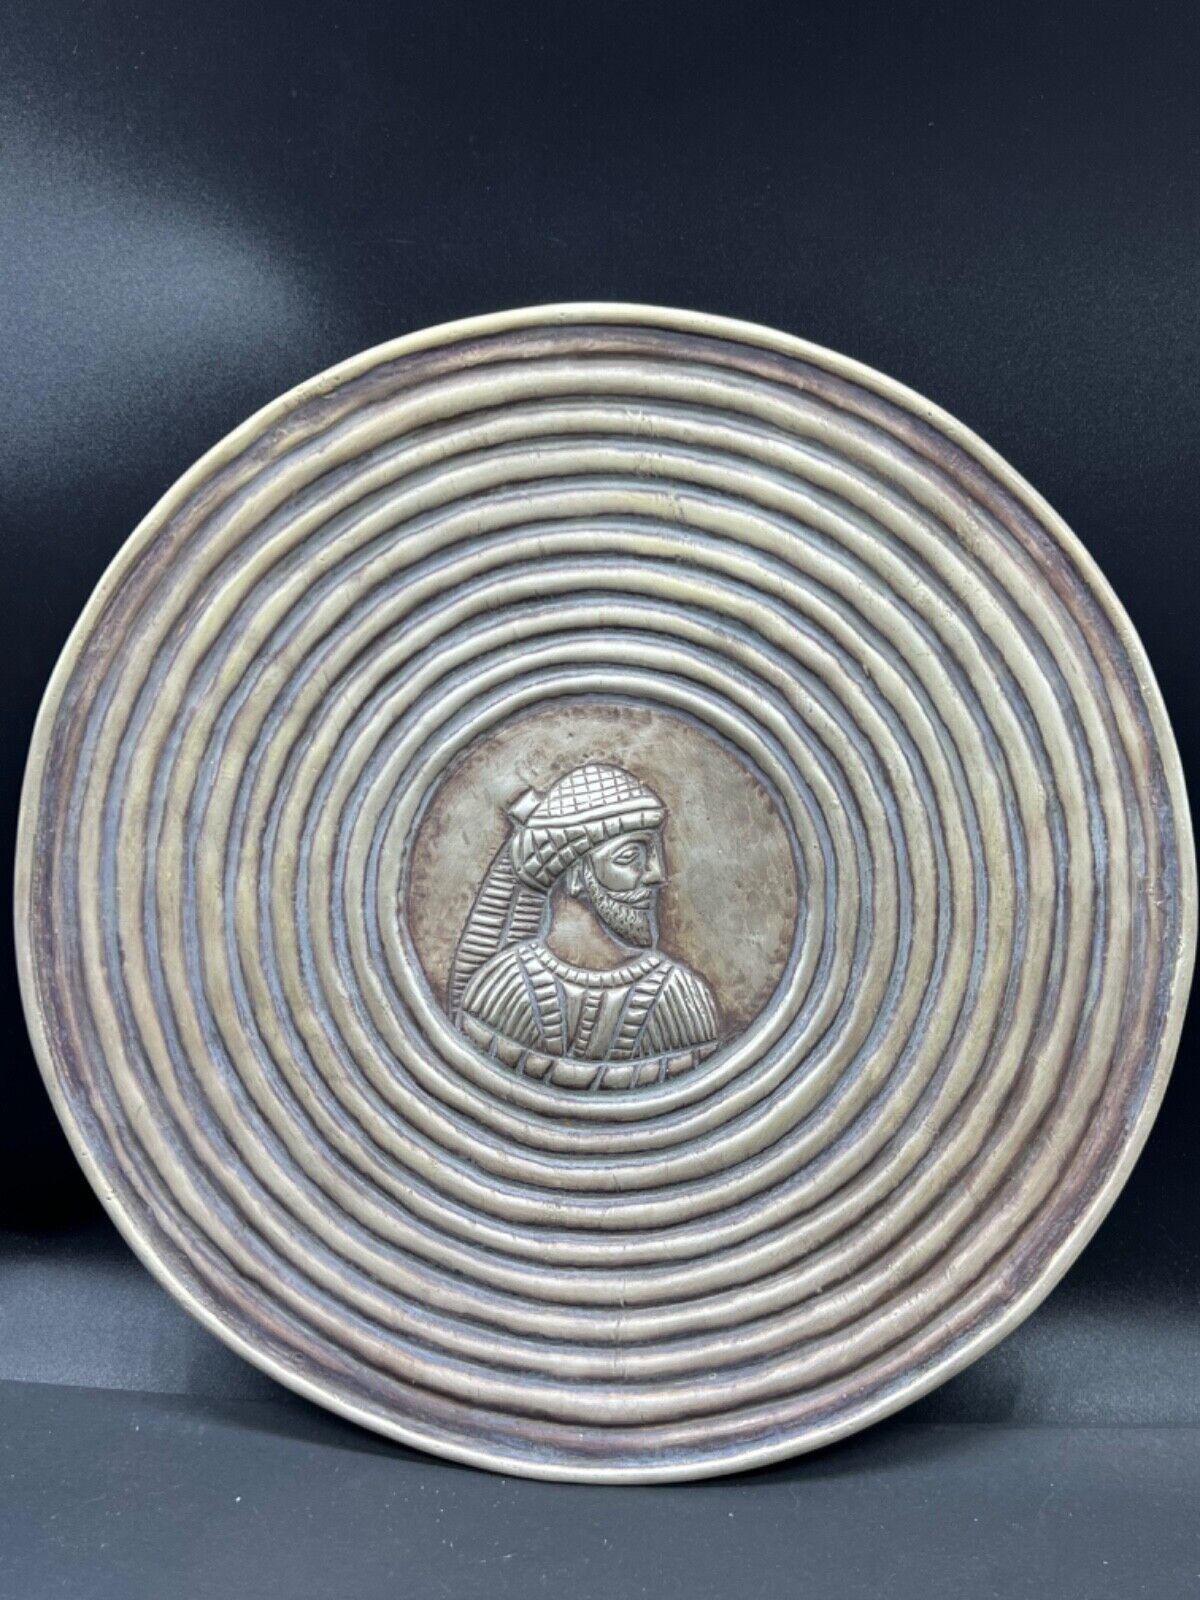 Rare Fine Sassanian Antiquities Old Solid Sliver Plate With Sassanian King Face